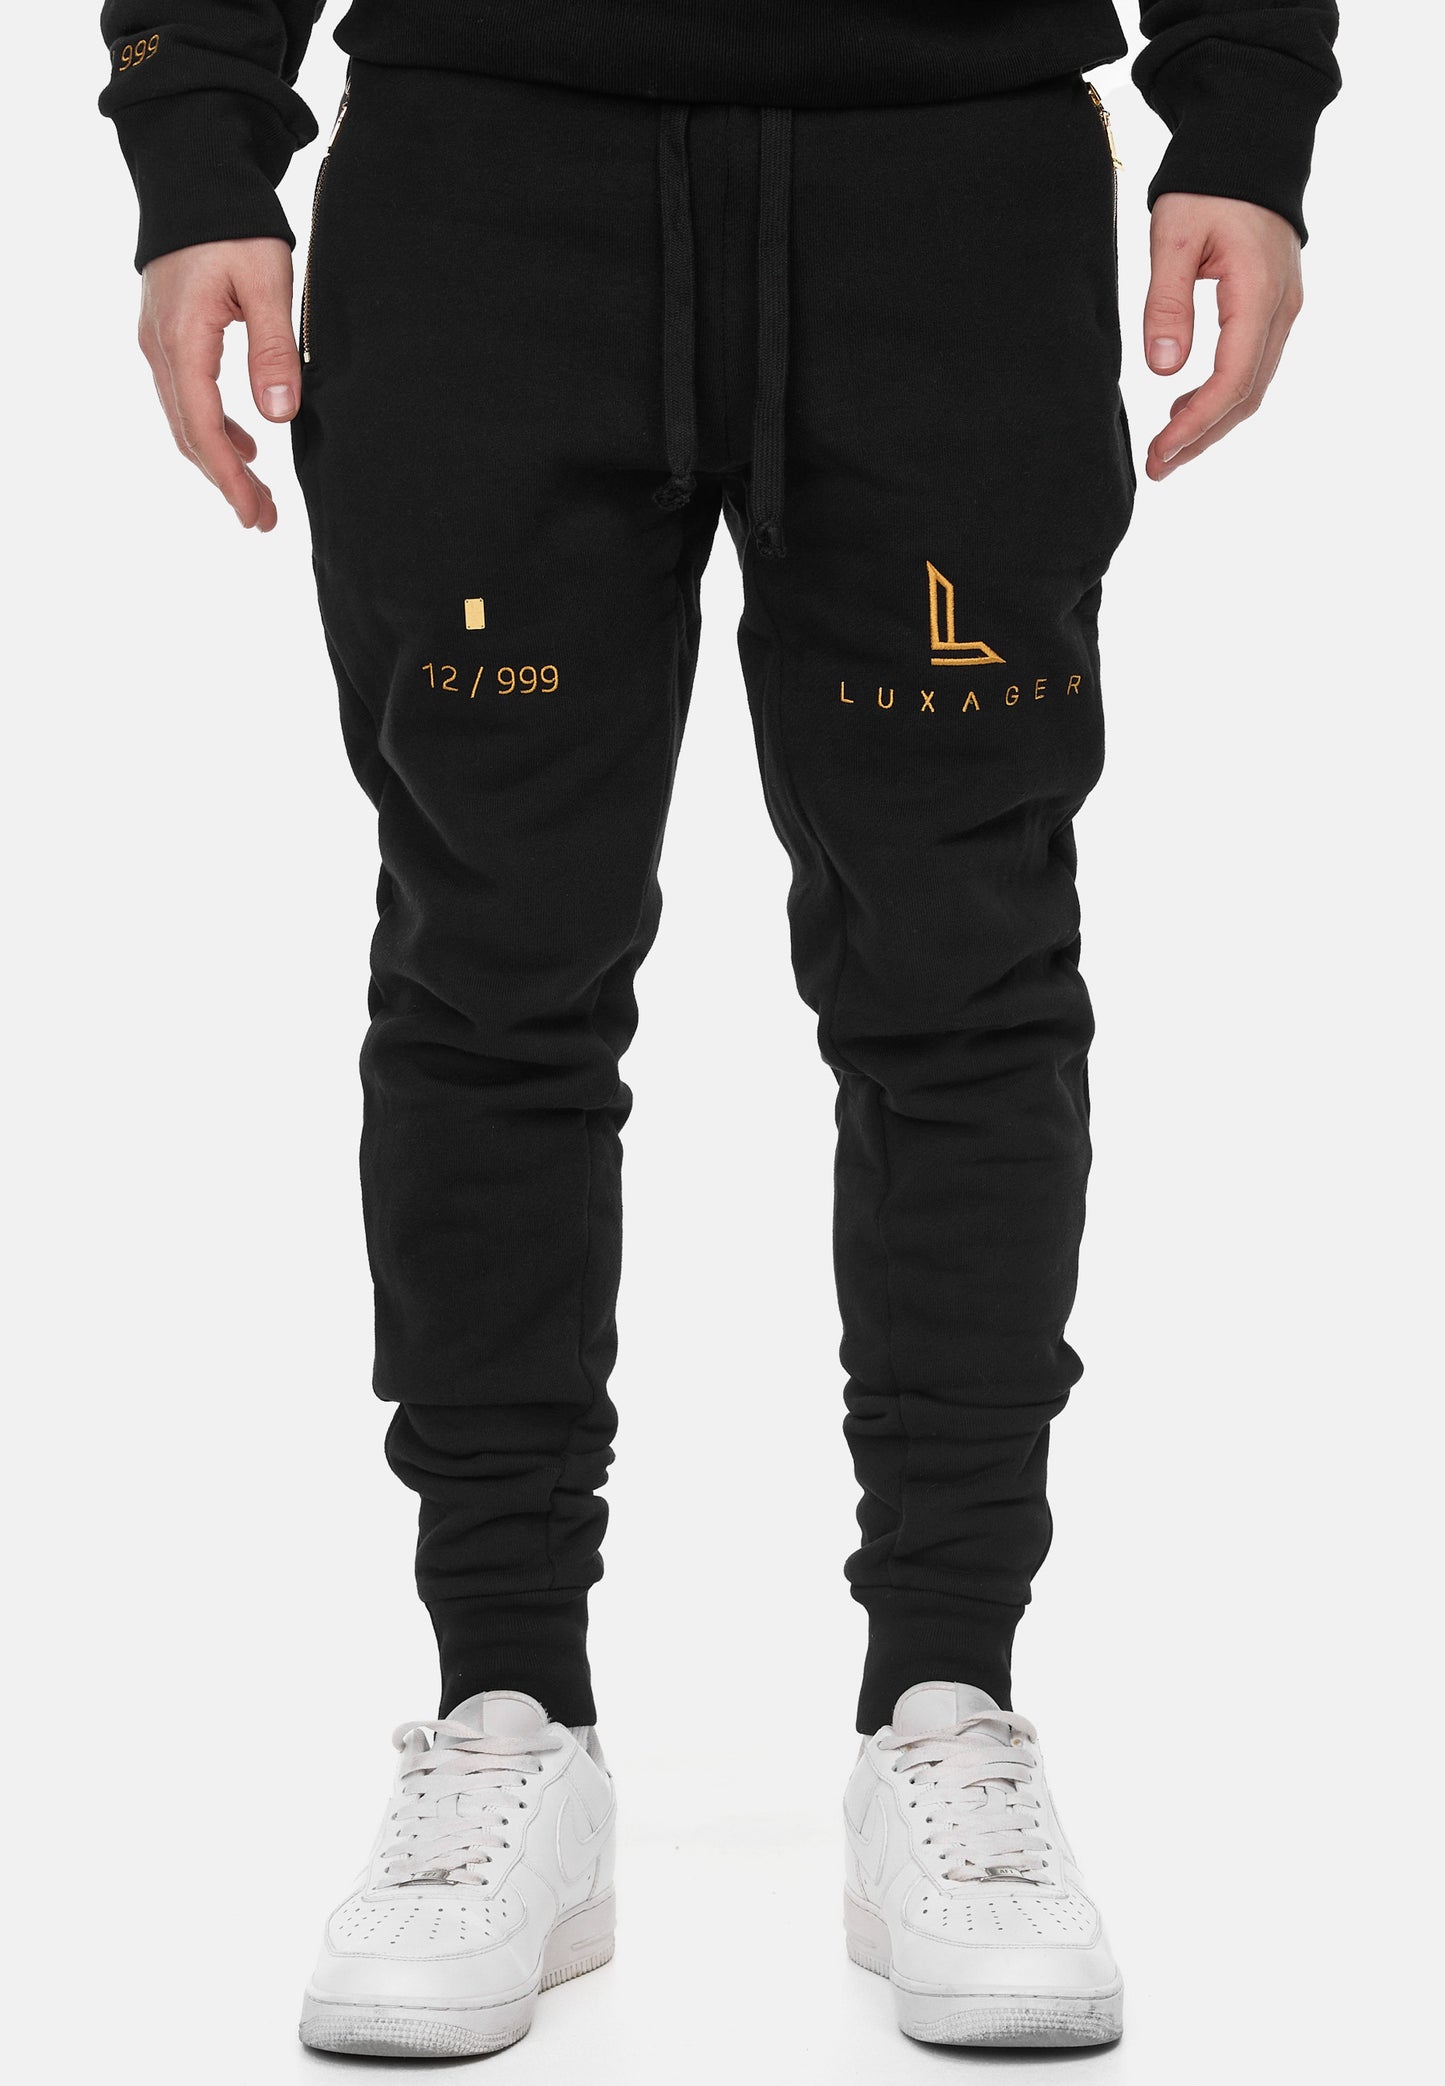 LUXAGER Sweatpants classic